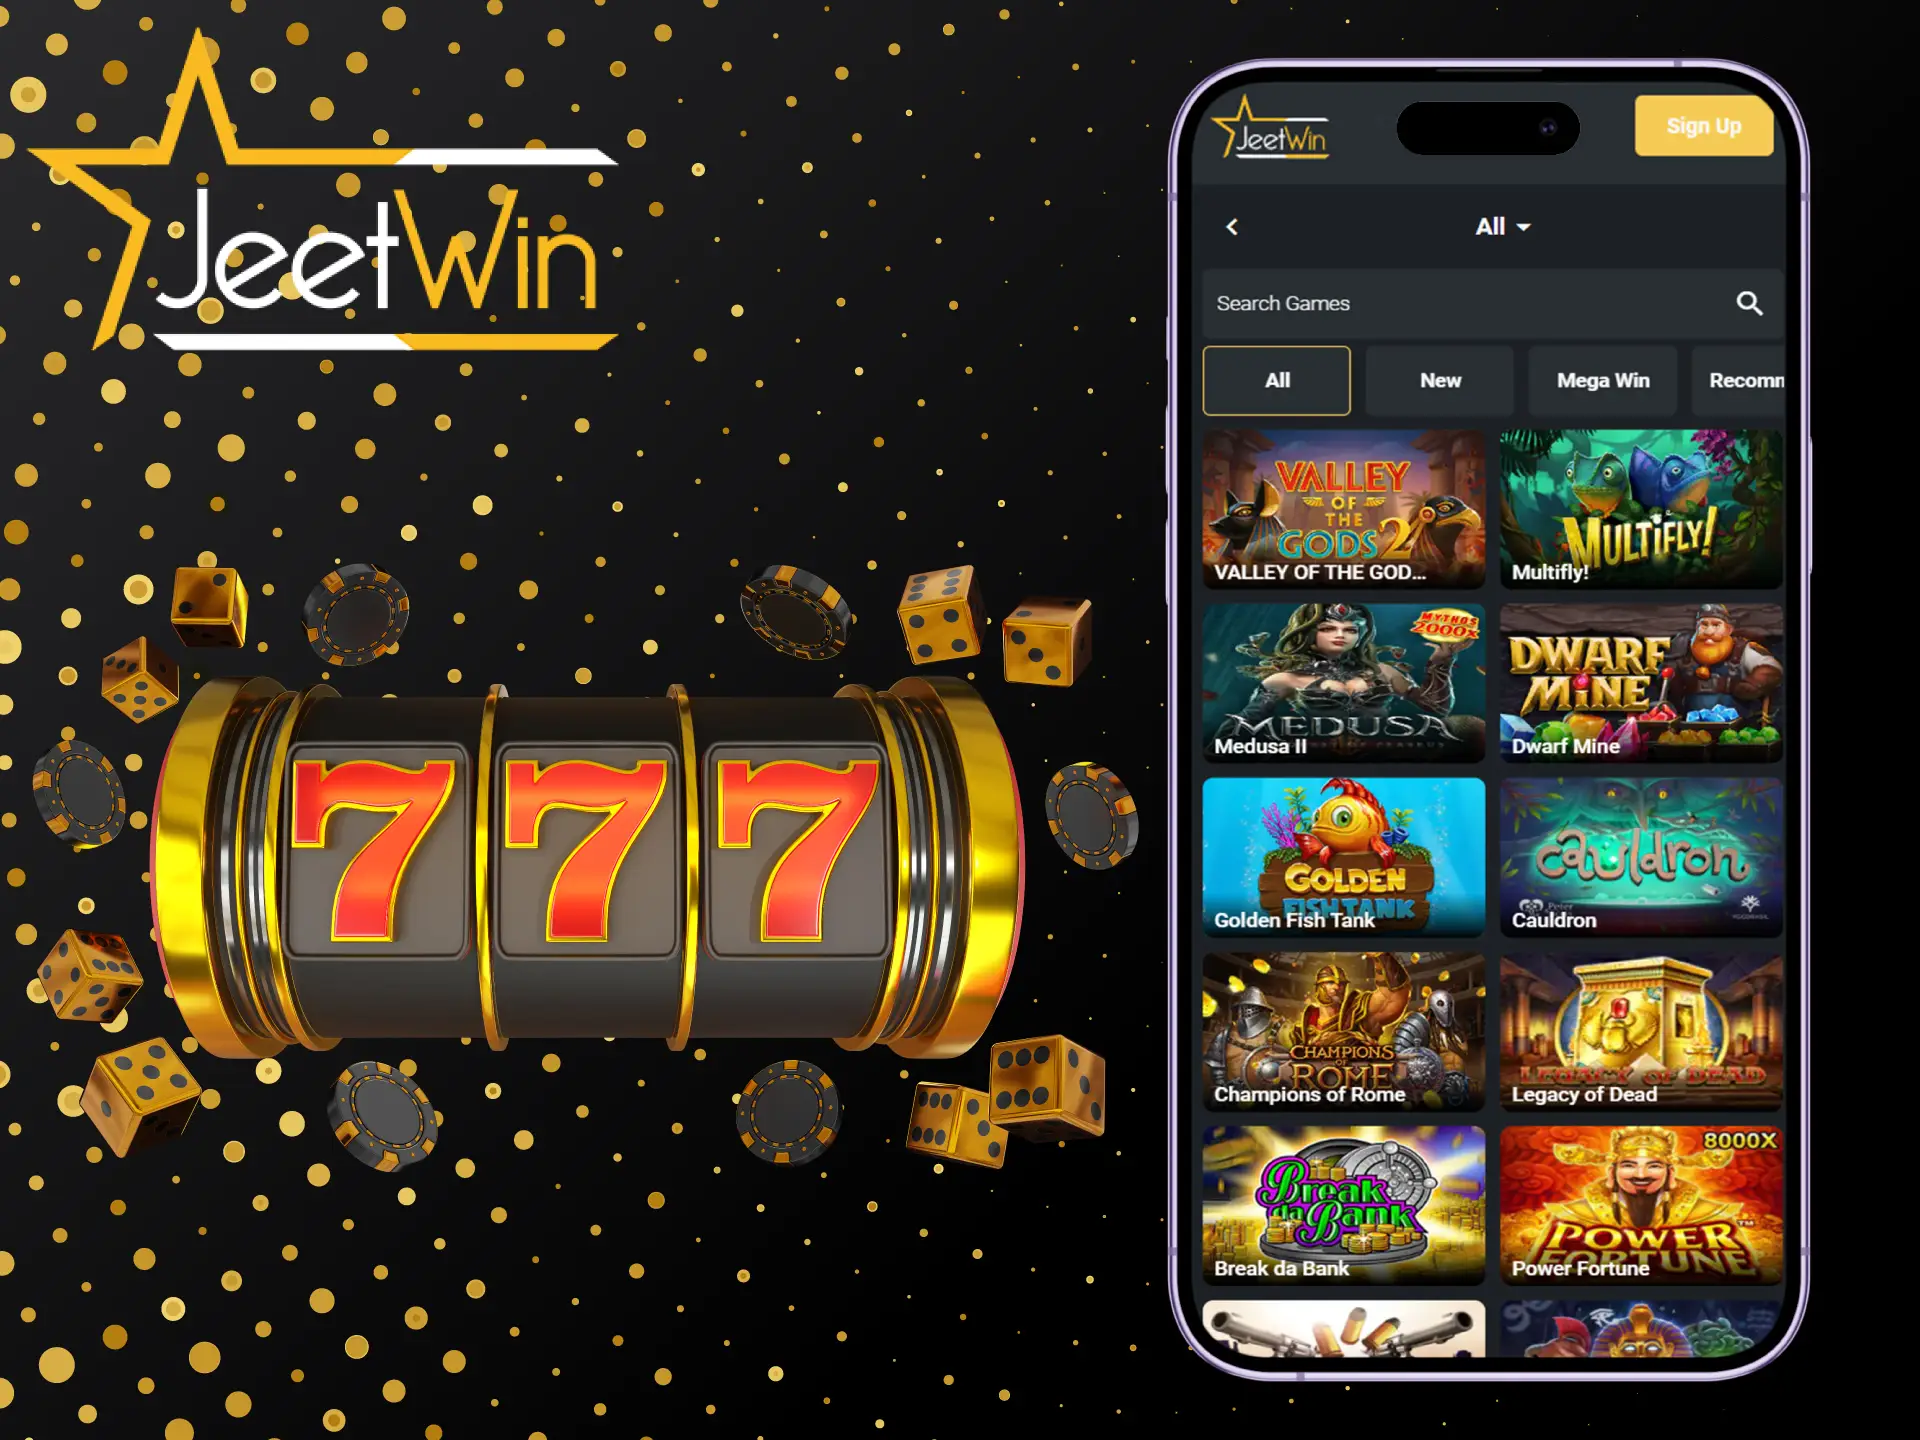 Install the JeetWin mobile app and have fun with slot games.